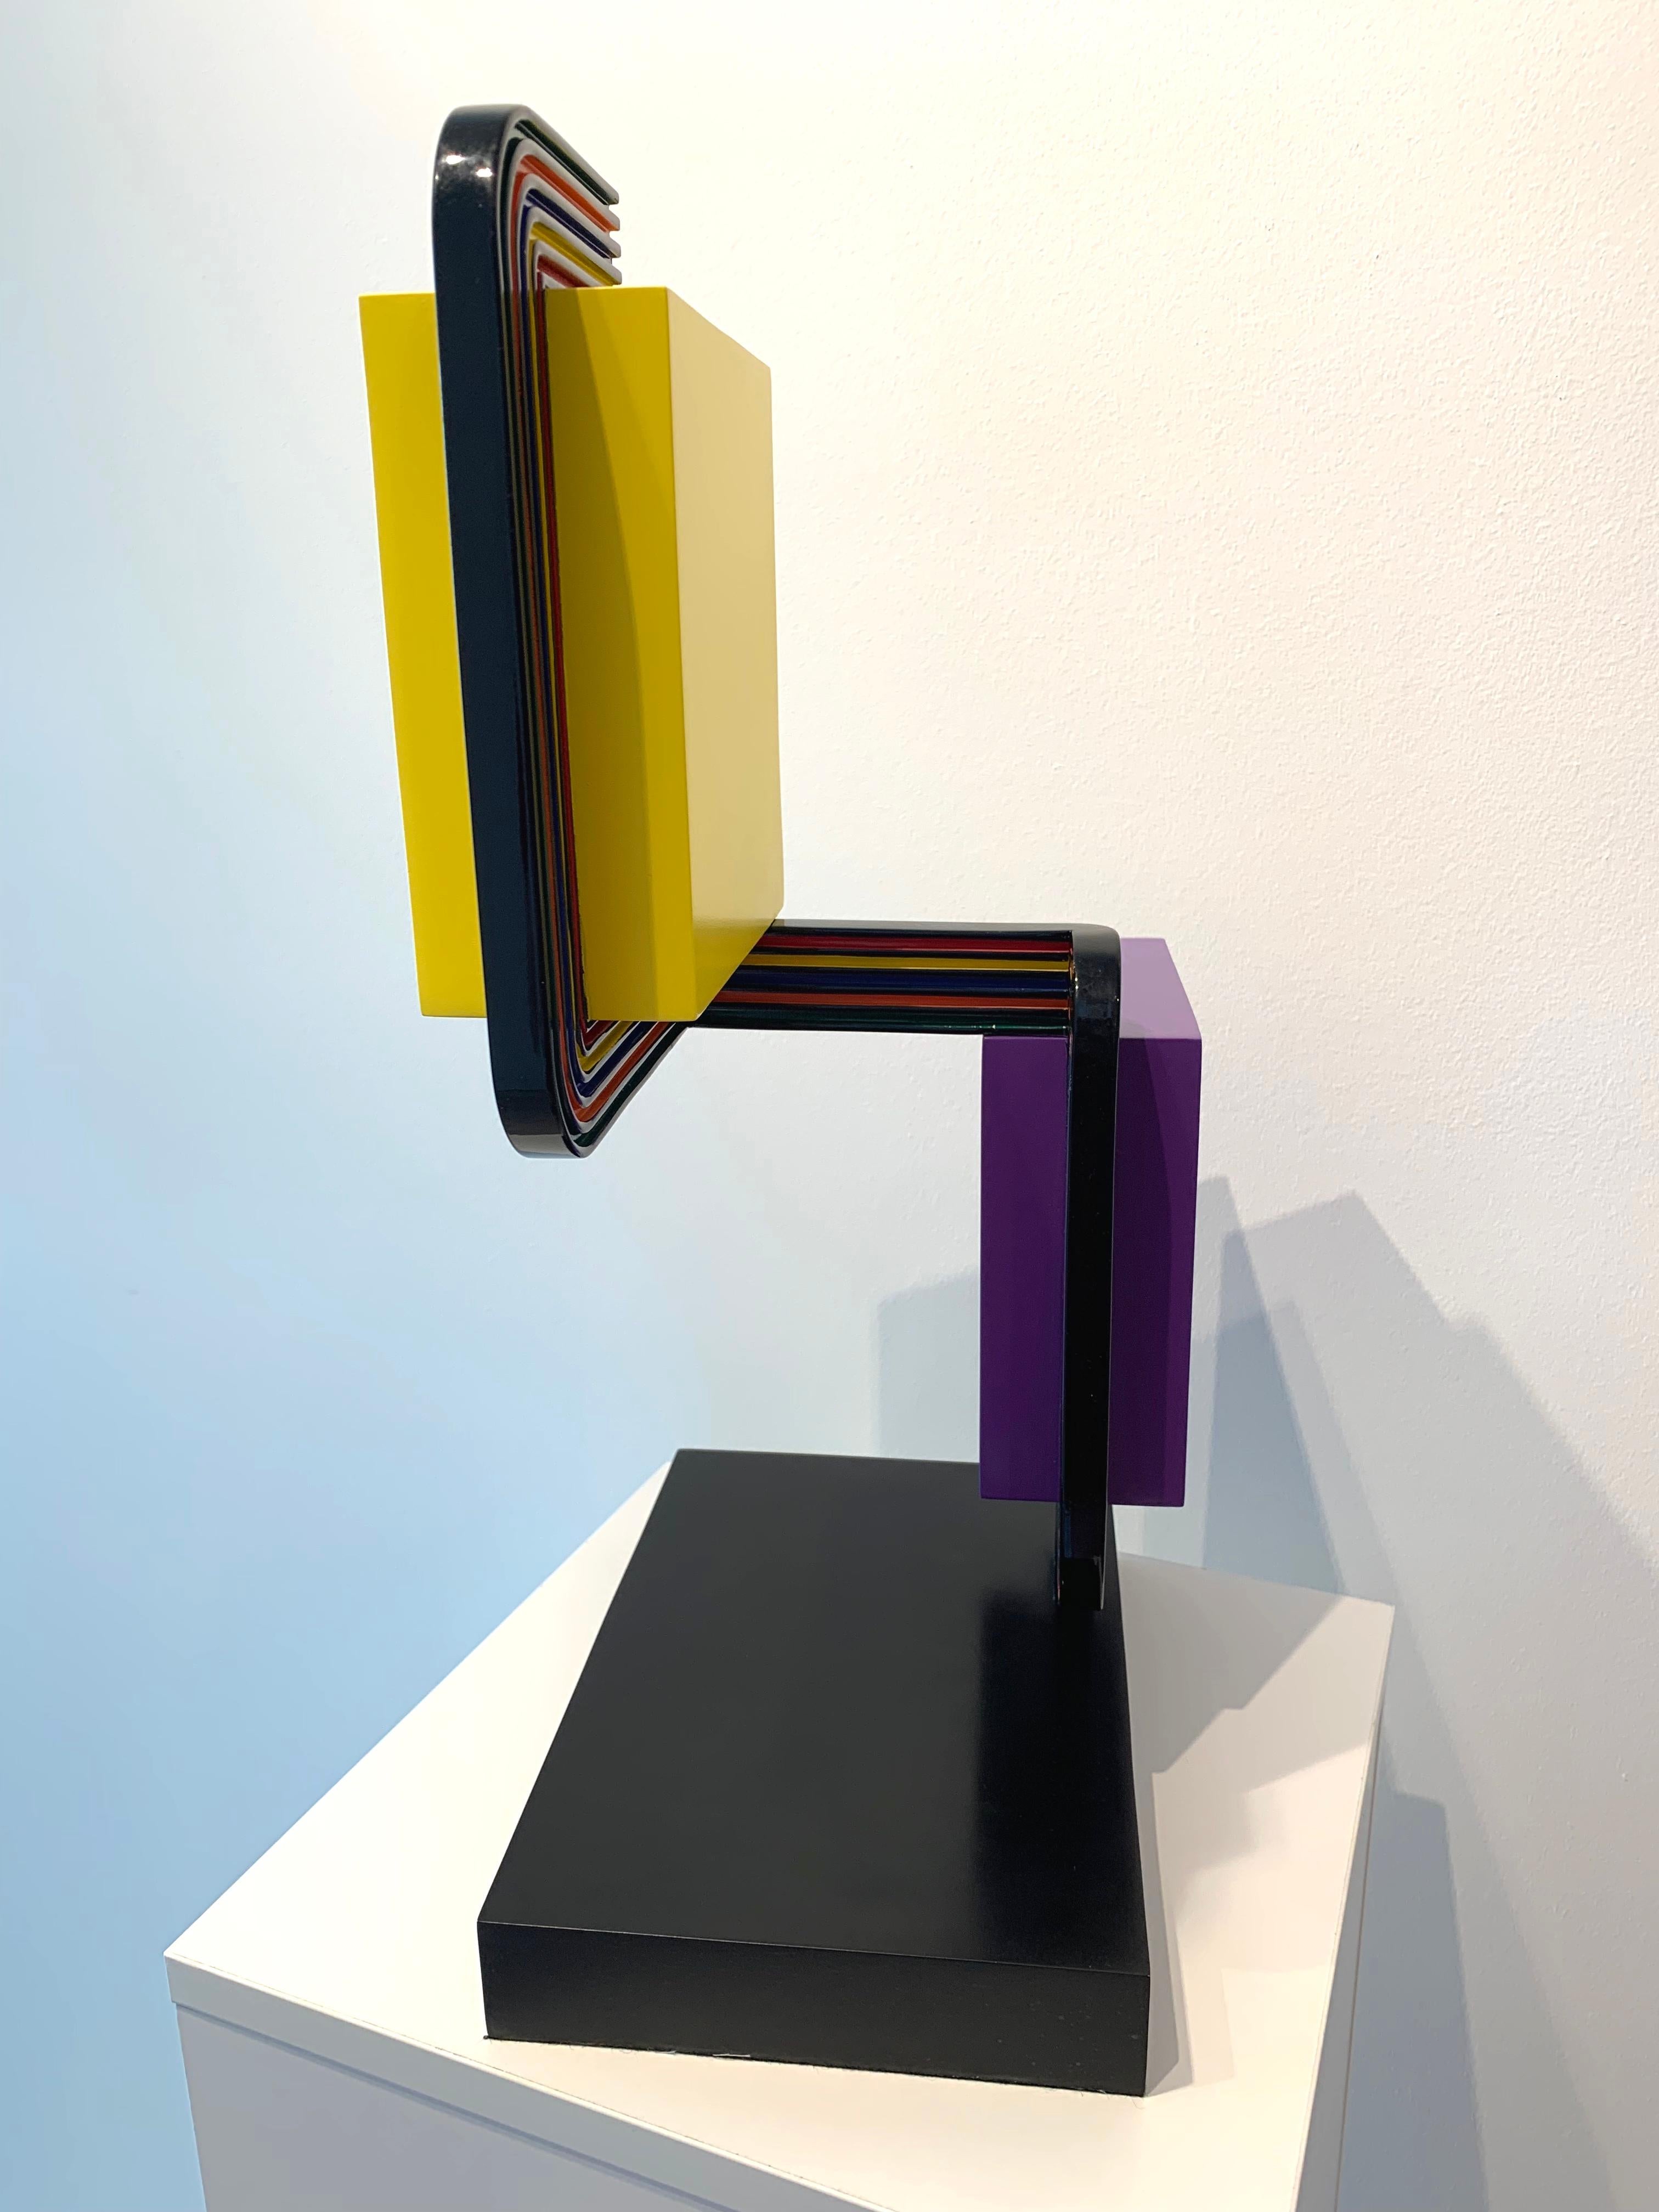 2022
Bronze
18 1/2 x 11 1/4 x 7 1/2 in. (47 x 28.6 x 19.1 cm)
Unique
Signed, dated, and numbered, bottom

Osvaldo Mariscotti’s art is an art of fundamentals: color, line, and the possibilities inherent in their variation and repetition. Using this